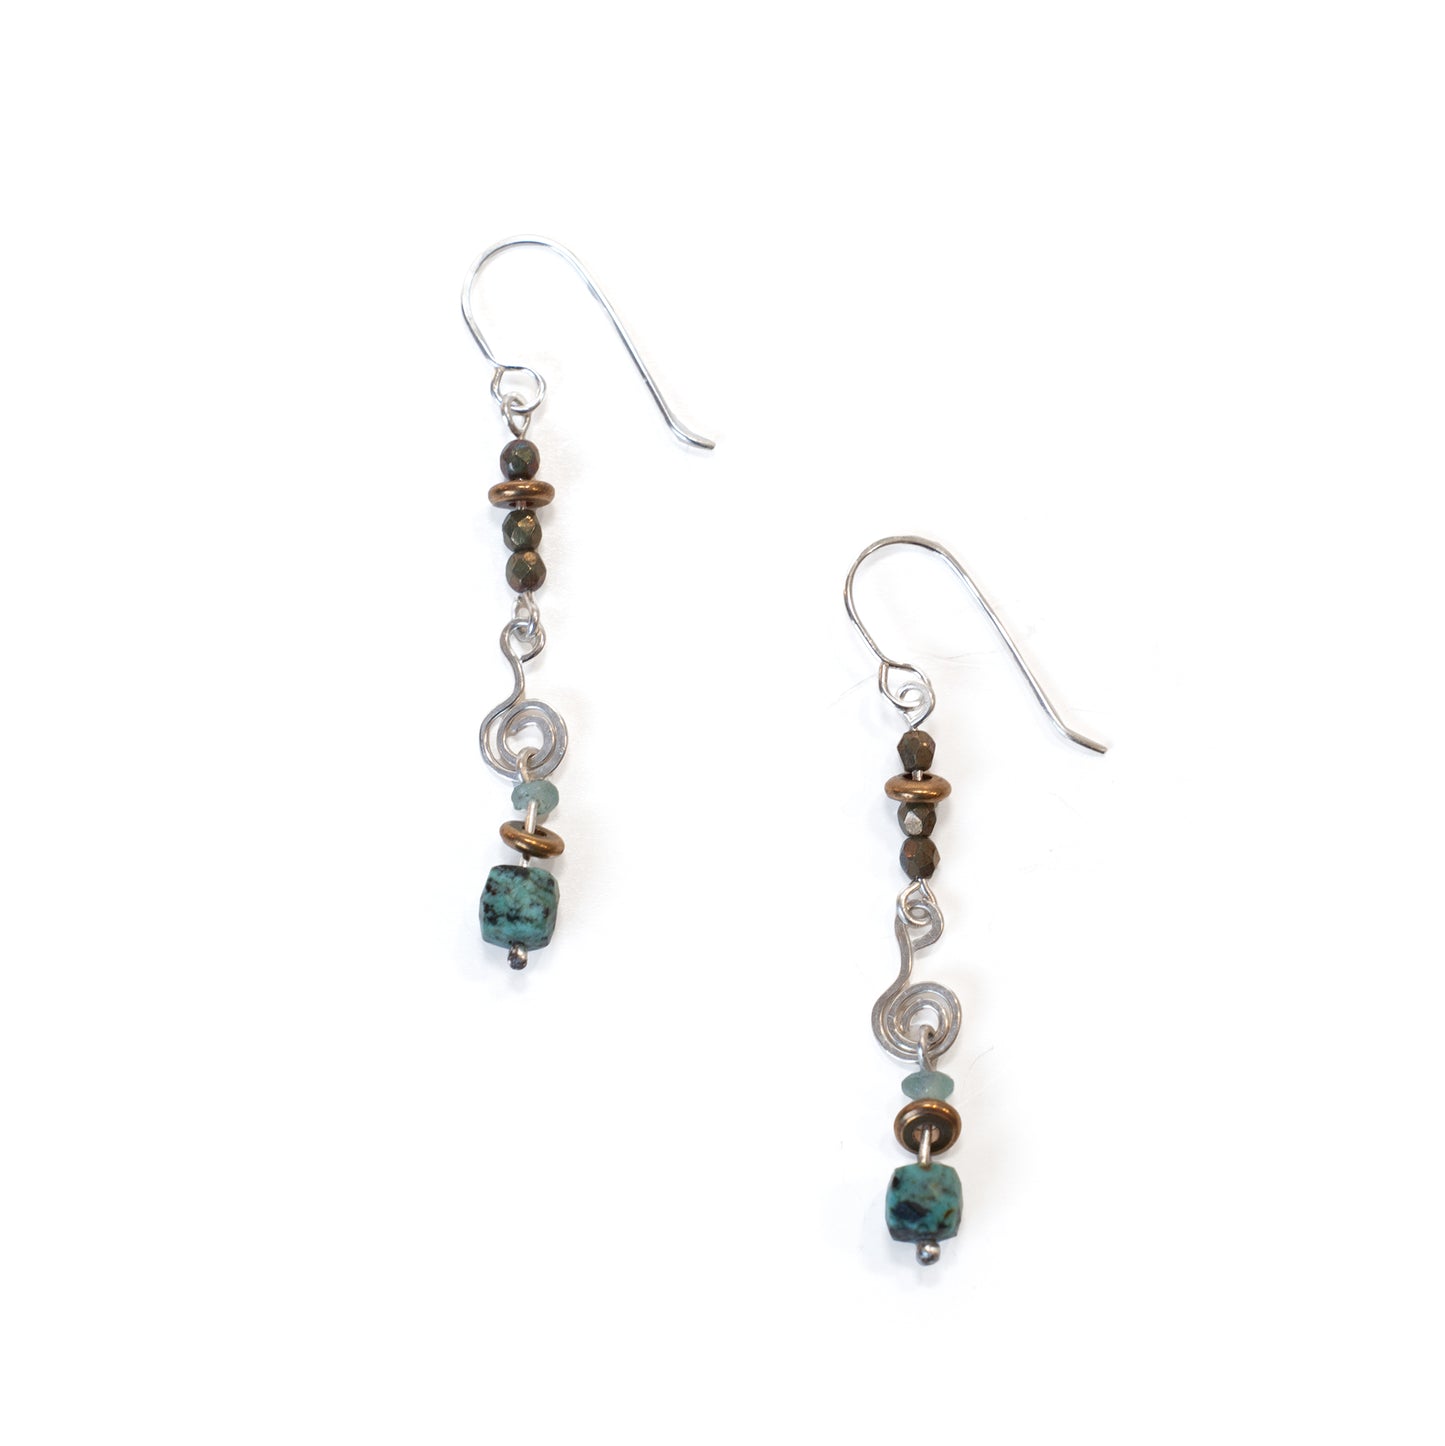 Sterling Silver Dangle Earrings with Metallic Beads and Green Stone Bead Detail